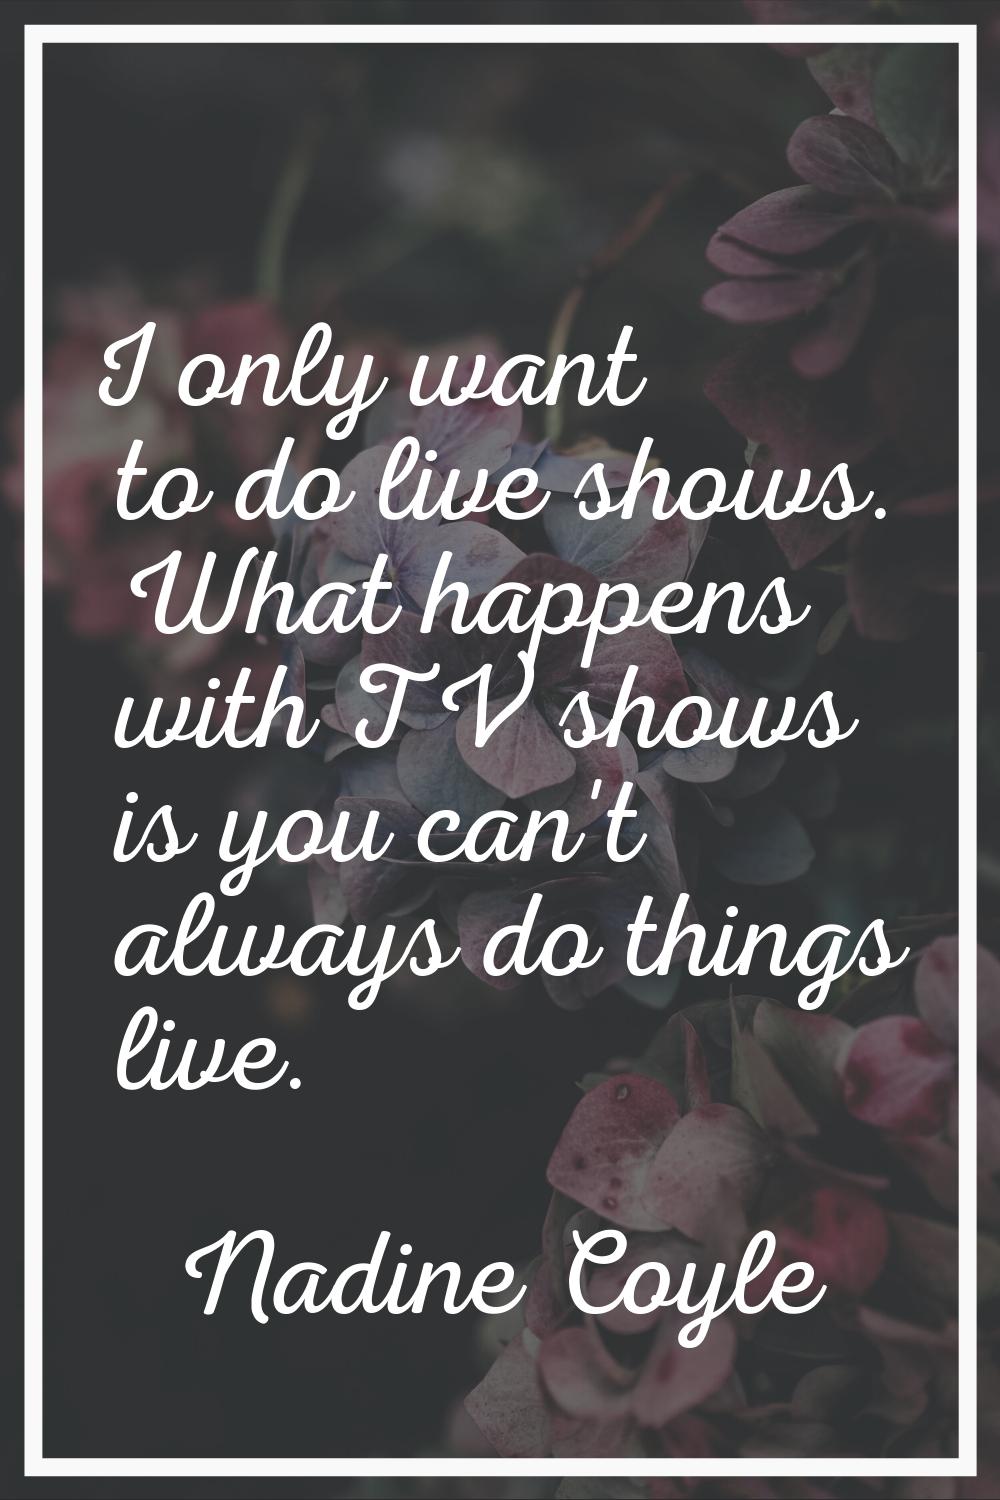 I only want to do live shows. What happens with TV shows is you can't always do things live.